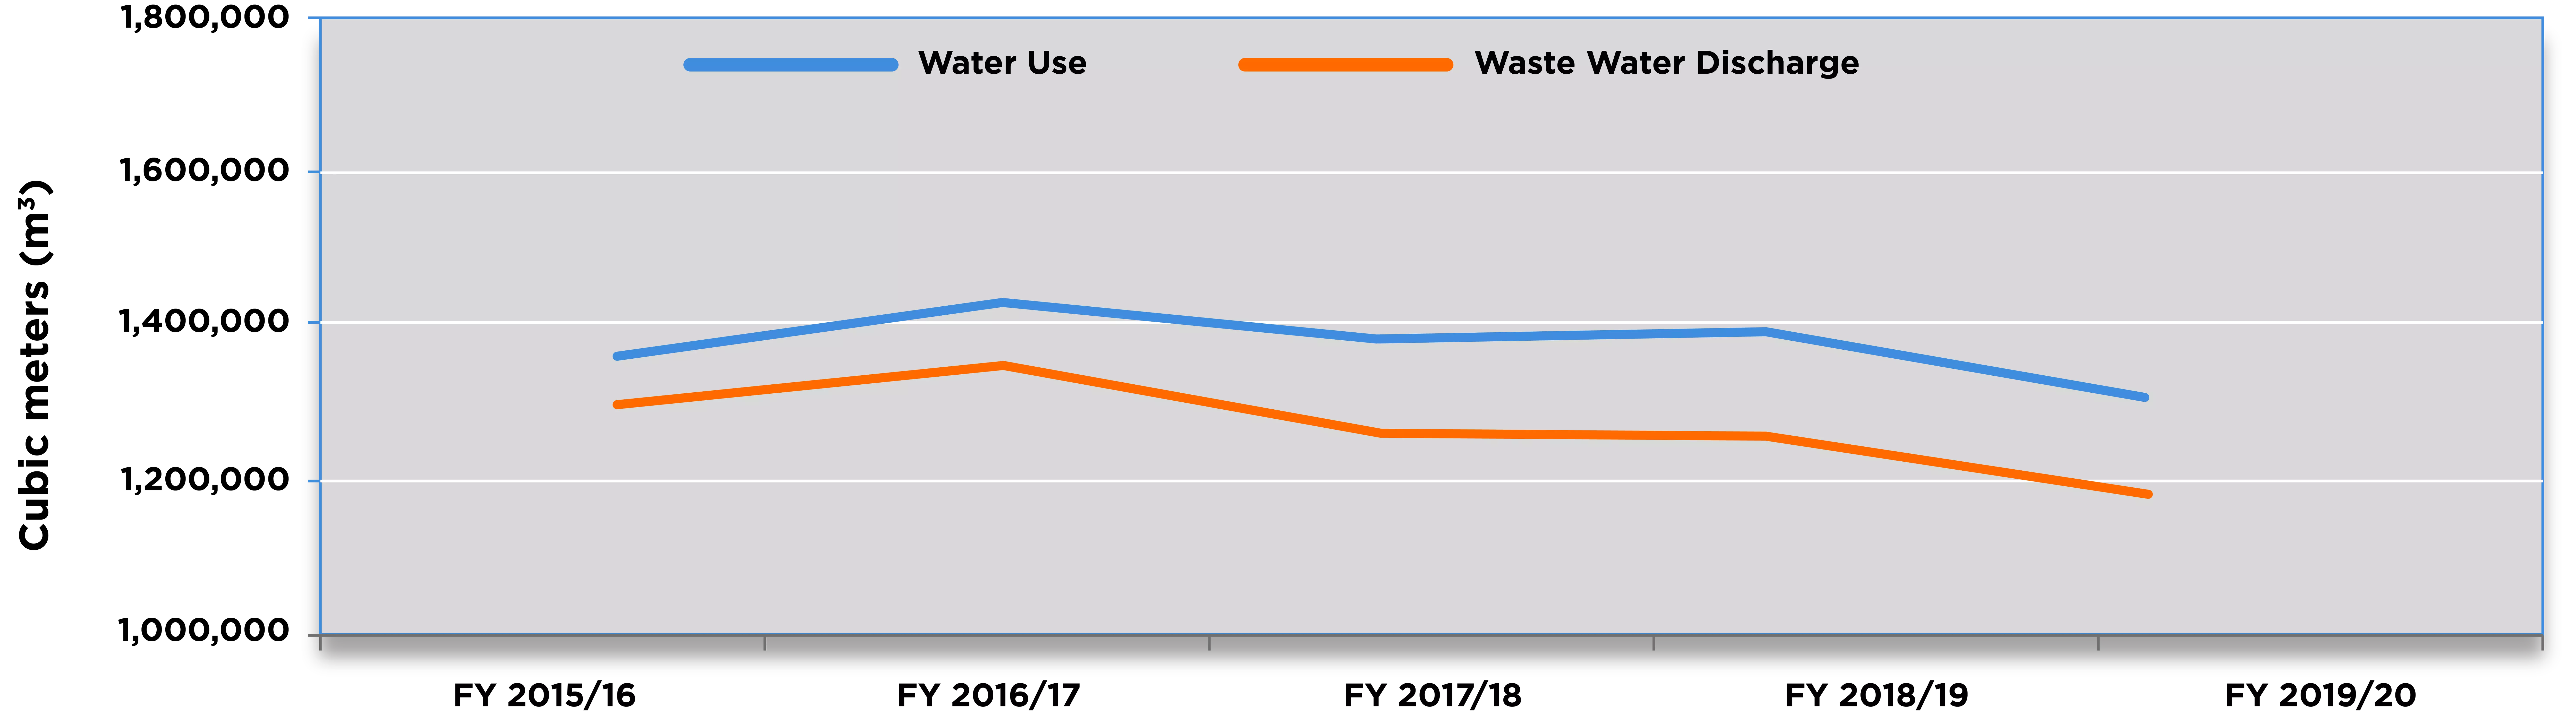 Water use vs Waste Water Discharge graph